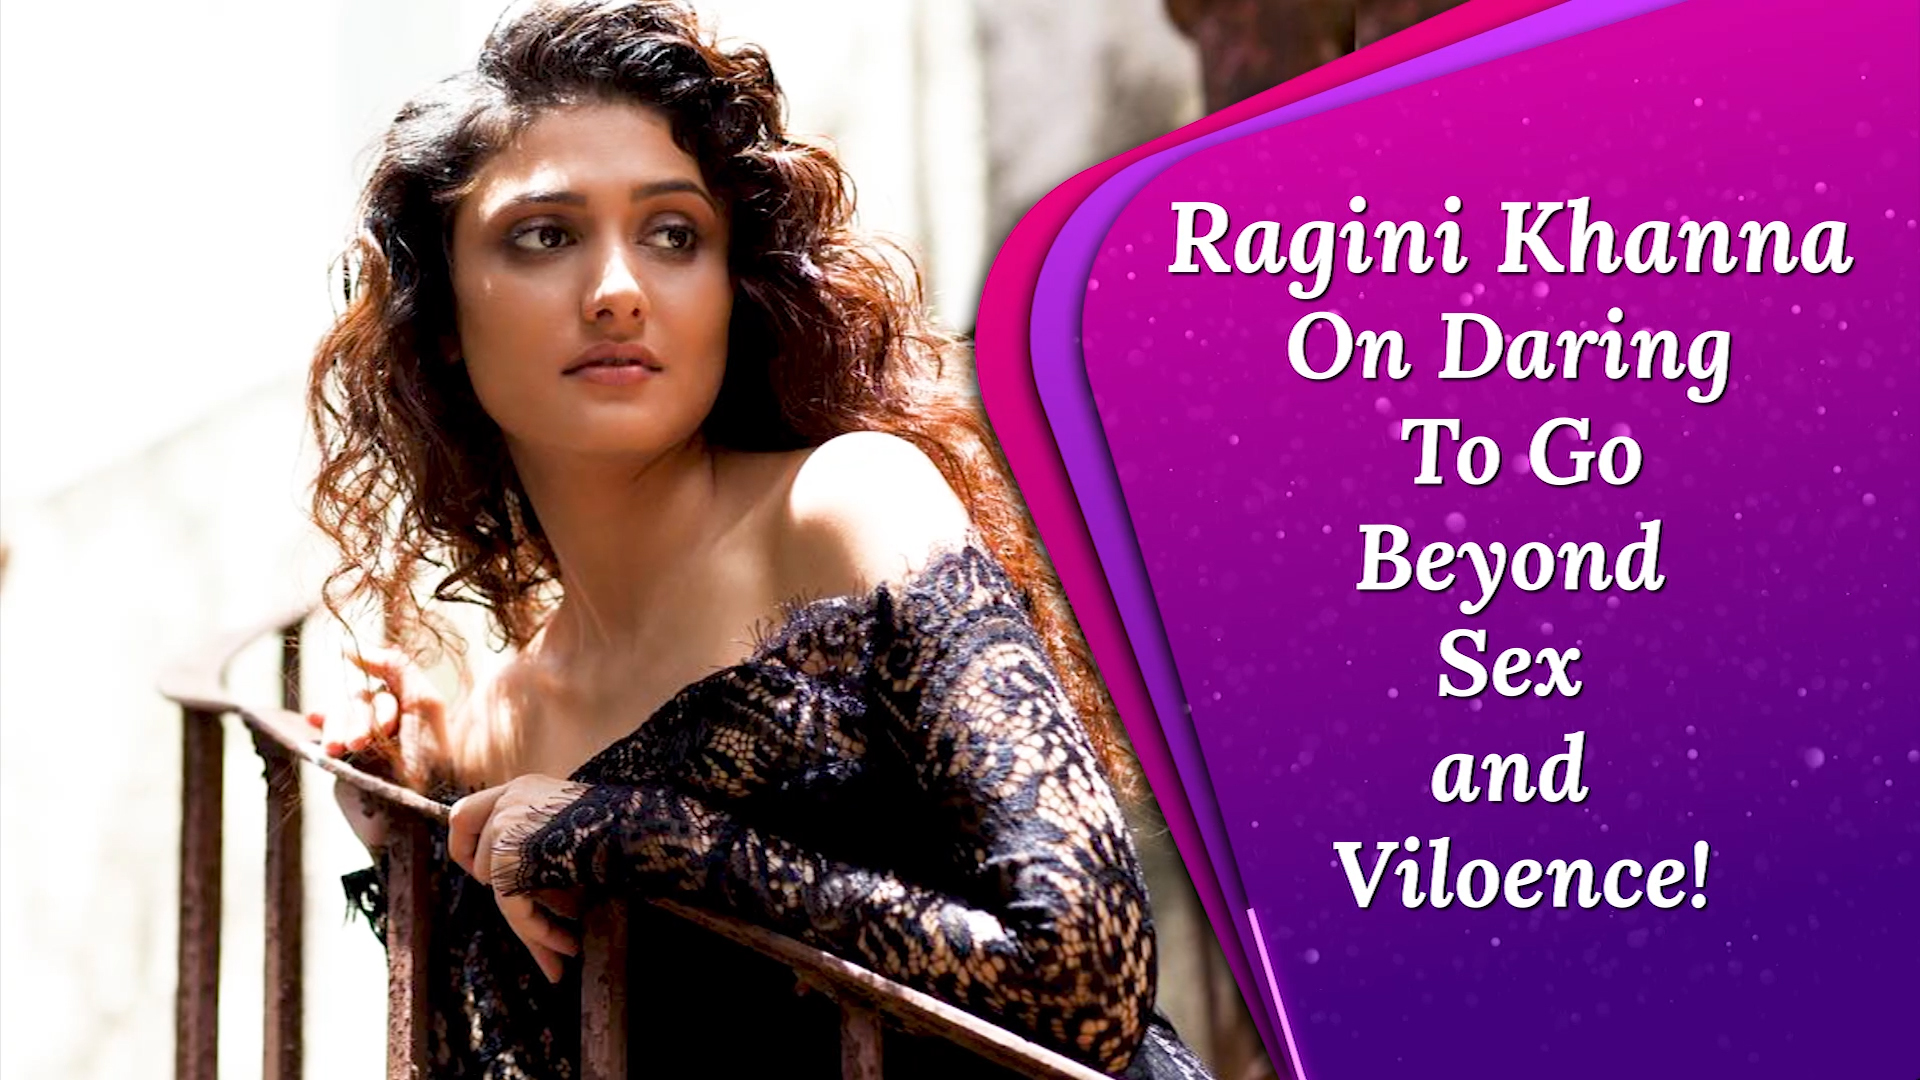 Ragini Khanna Sex Video - Ragini Khanna: The Overdose Of Sex, Nudity and Violence In Webseries On OTT  Platforms Is Sickening! | ðŸ“¹ Watch Videos From LatestLY